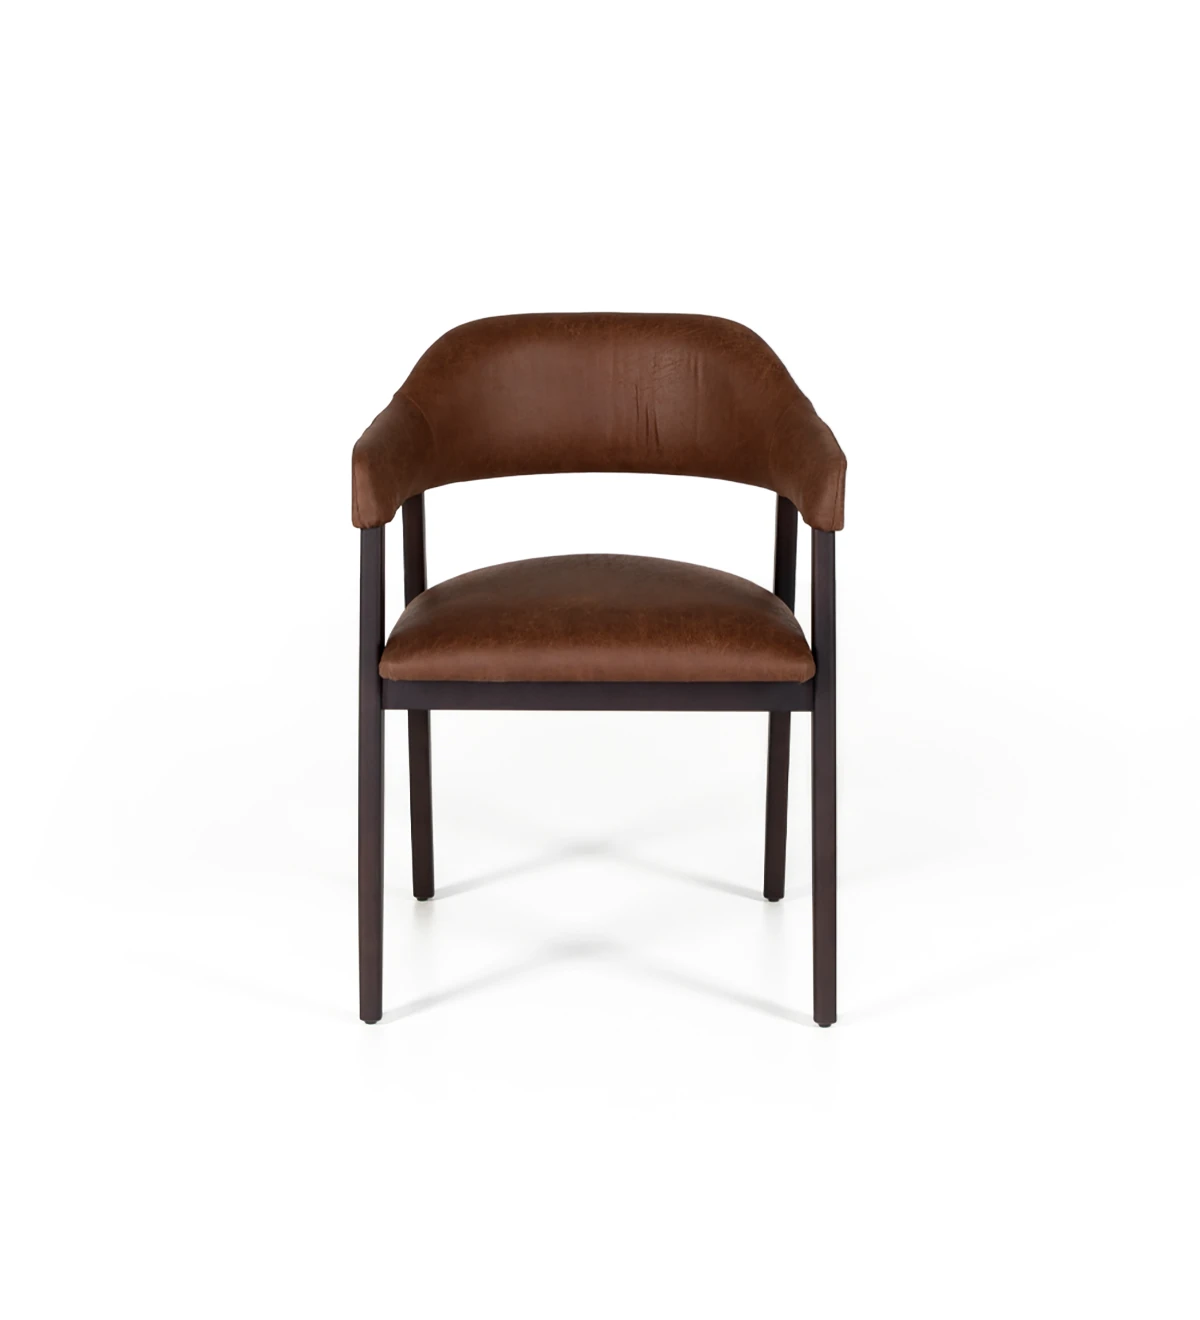 Dark brown ash wood chair with fabric upholstered armrests, seat and back.